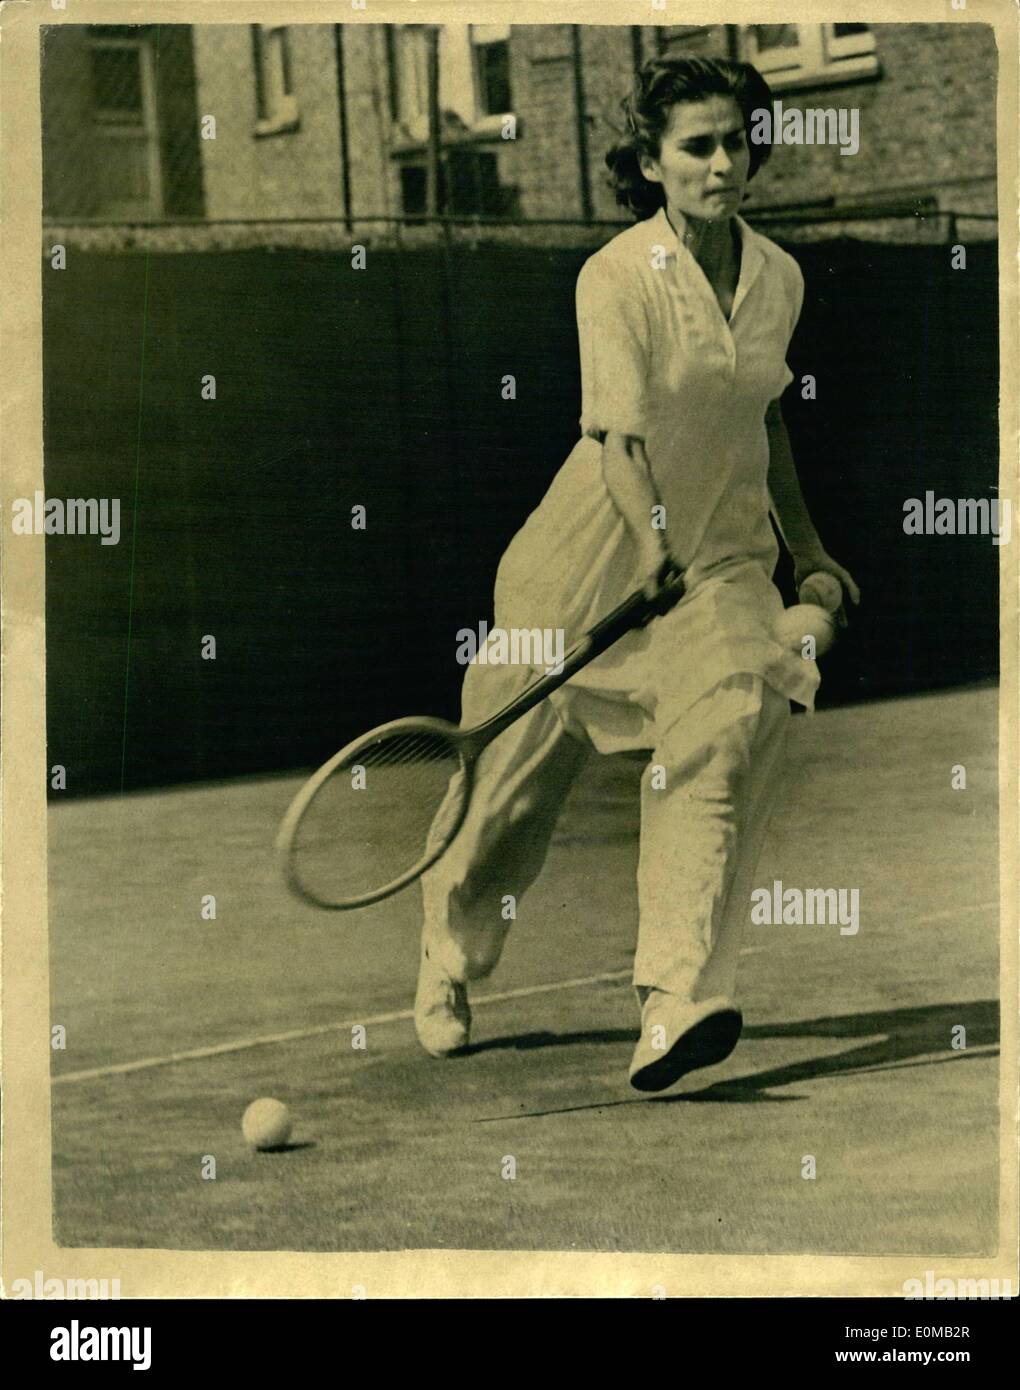 May 05, 1954 - Paddington Lawn Tennis Tournament. Player from Pakistan.  Keystone Photo Shows: Wearing long white trousers and a loose shirt, Miss  Perween Sheickh of Pakistan makes a short during her